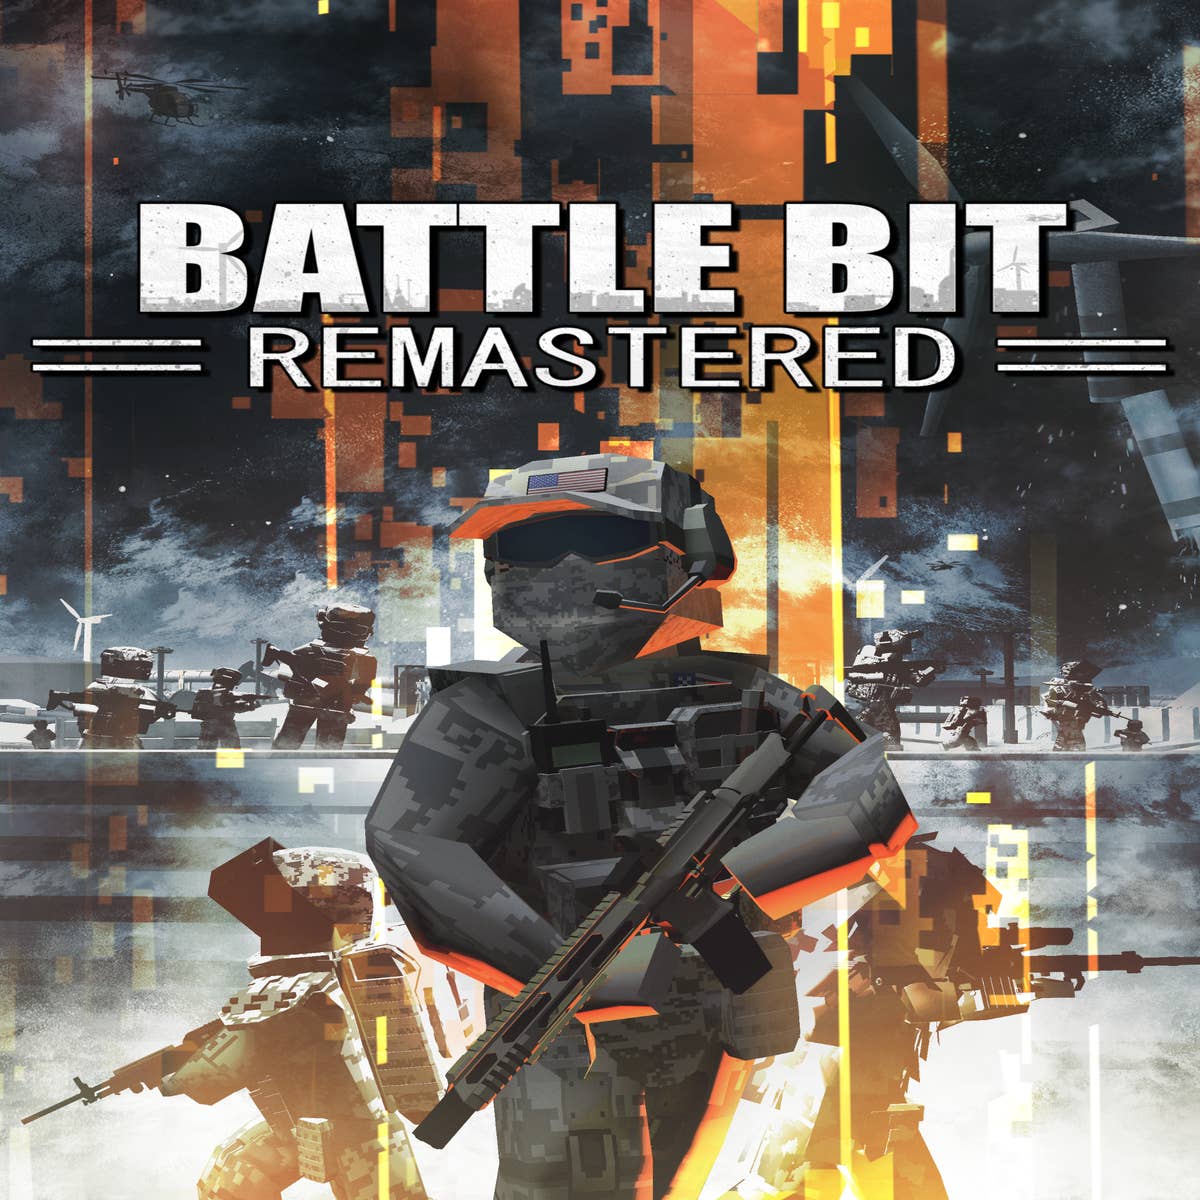 BattleBit Remastered is a 254-player FPS and this summer's